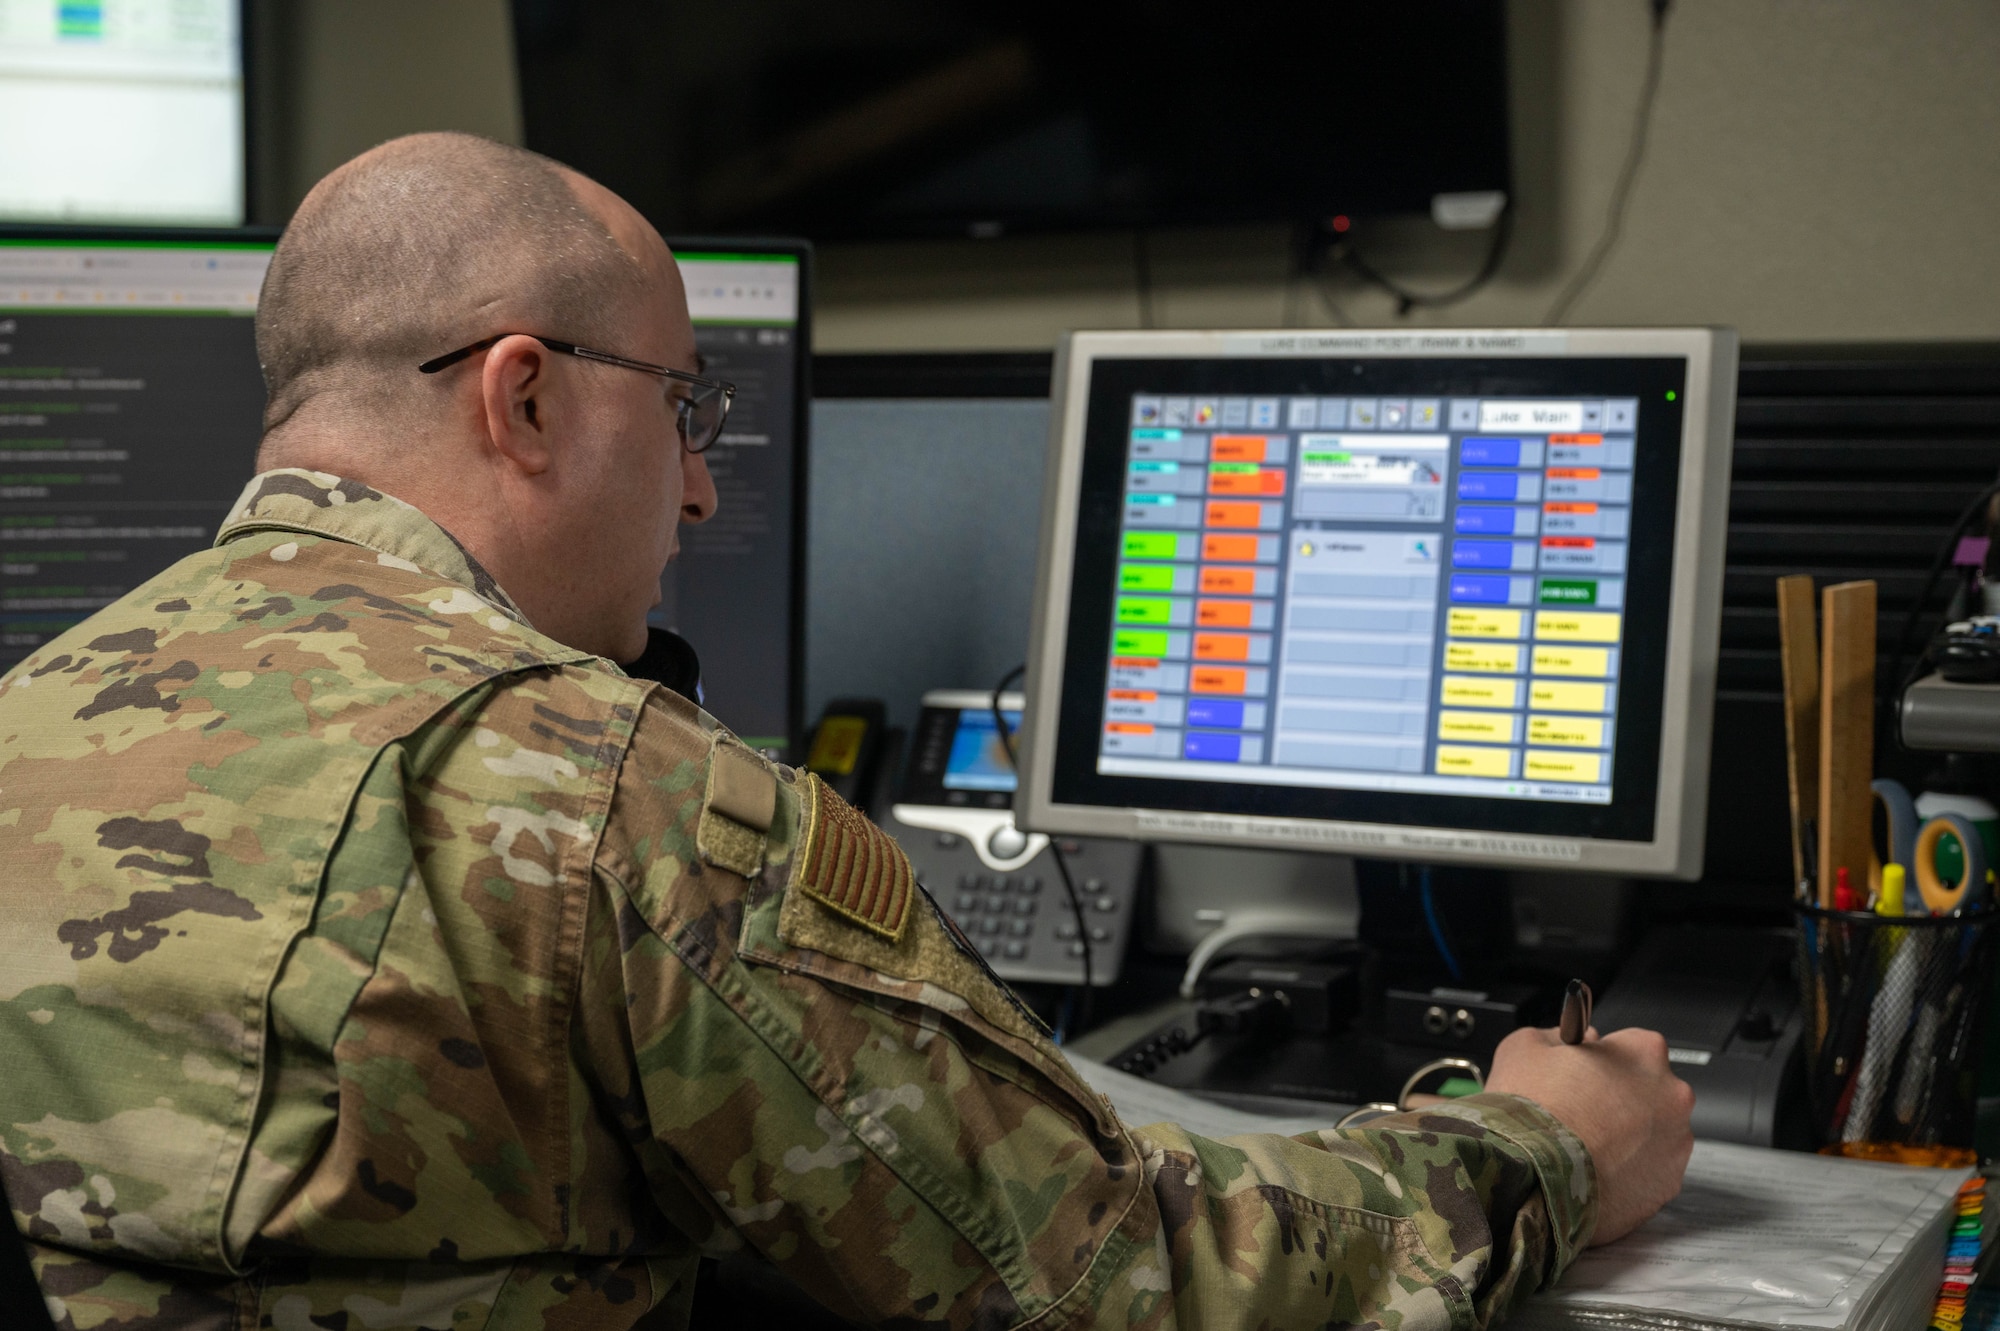 U.S. Air Force Tech. Sgt. Robert Silverman, 56th Fighter Wing Command Post operations non-commissioned officer in charge, speaks on the phone during required hourly checks, March 9, 2023, at Luke Air Force Base, Arizona.